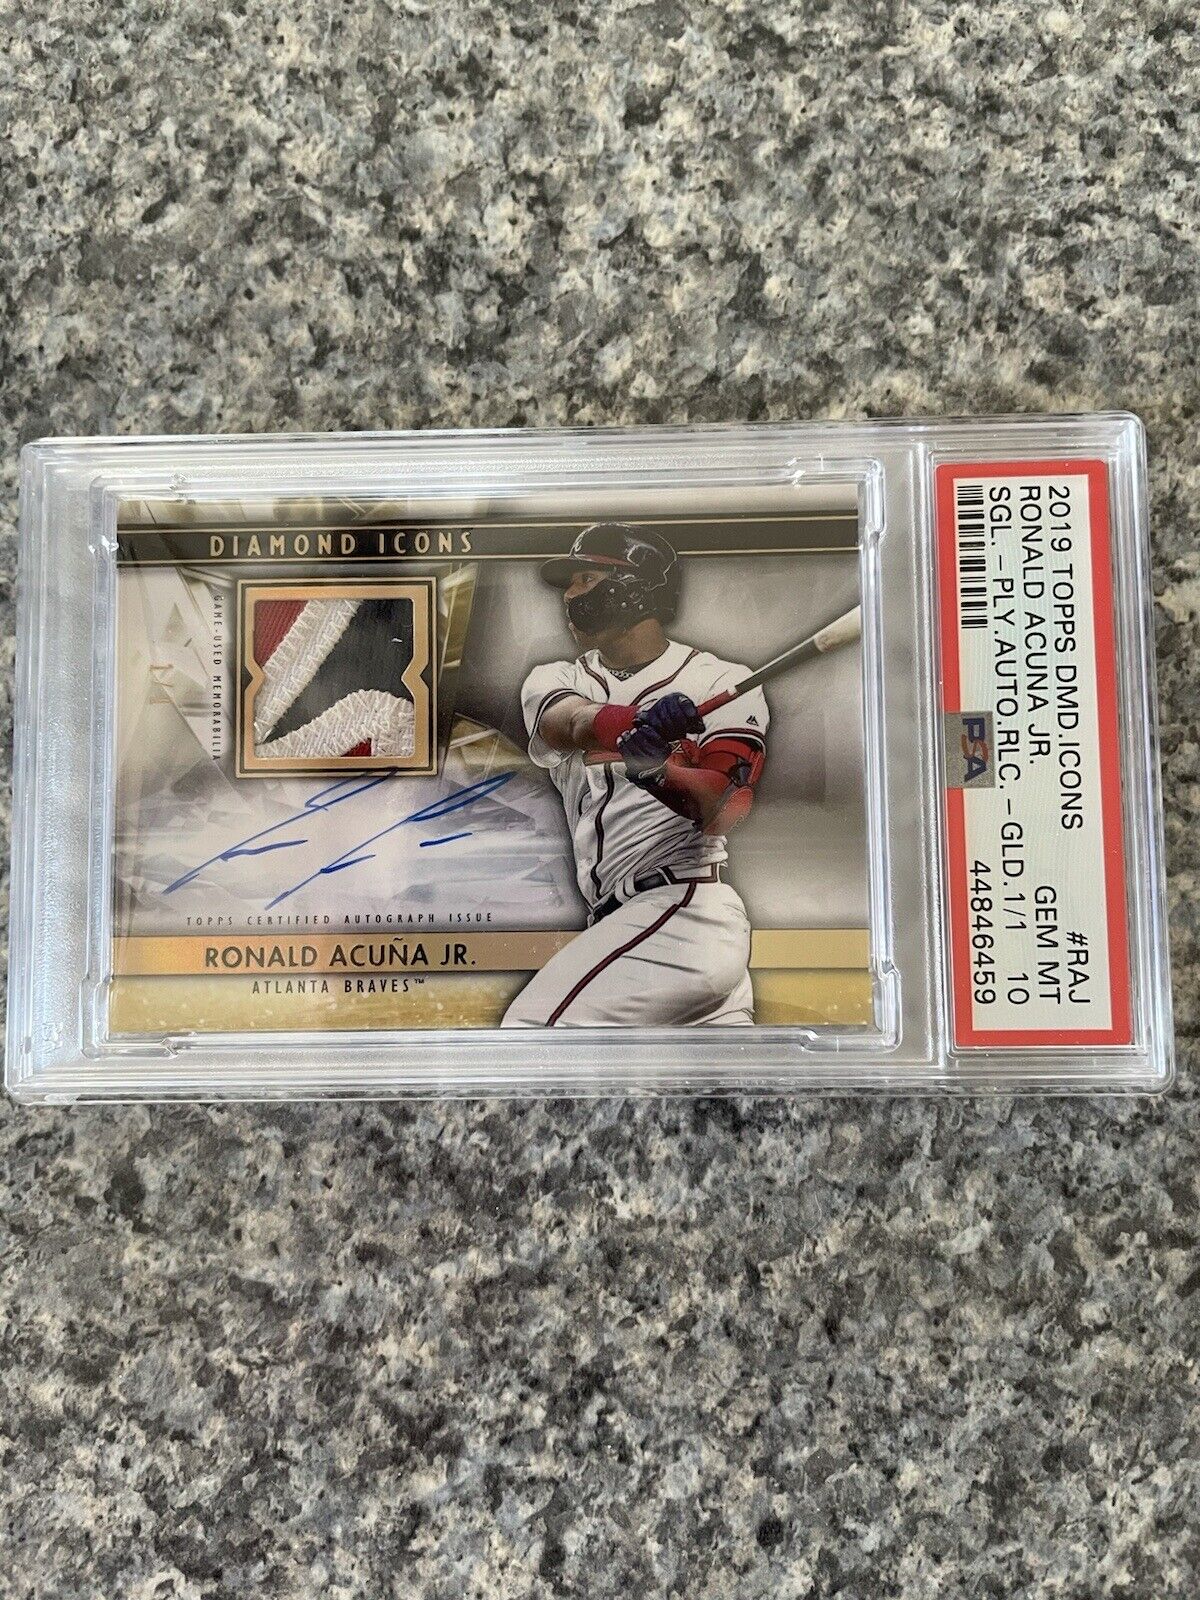 Ronald Acuna Jr. 2019 Topps DMD ICONS 1/1 Auto Game Used Material PSA 10